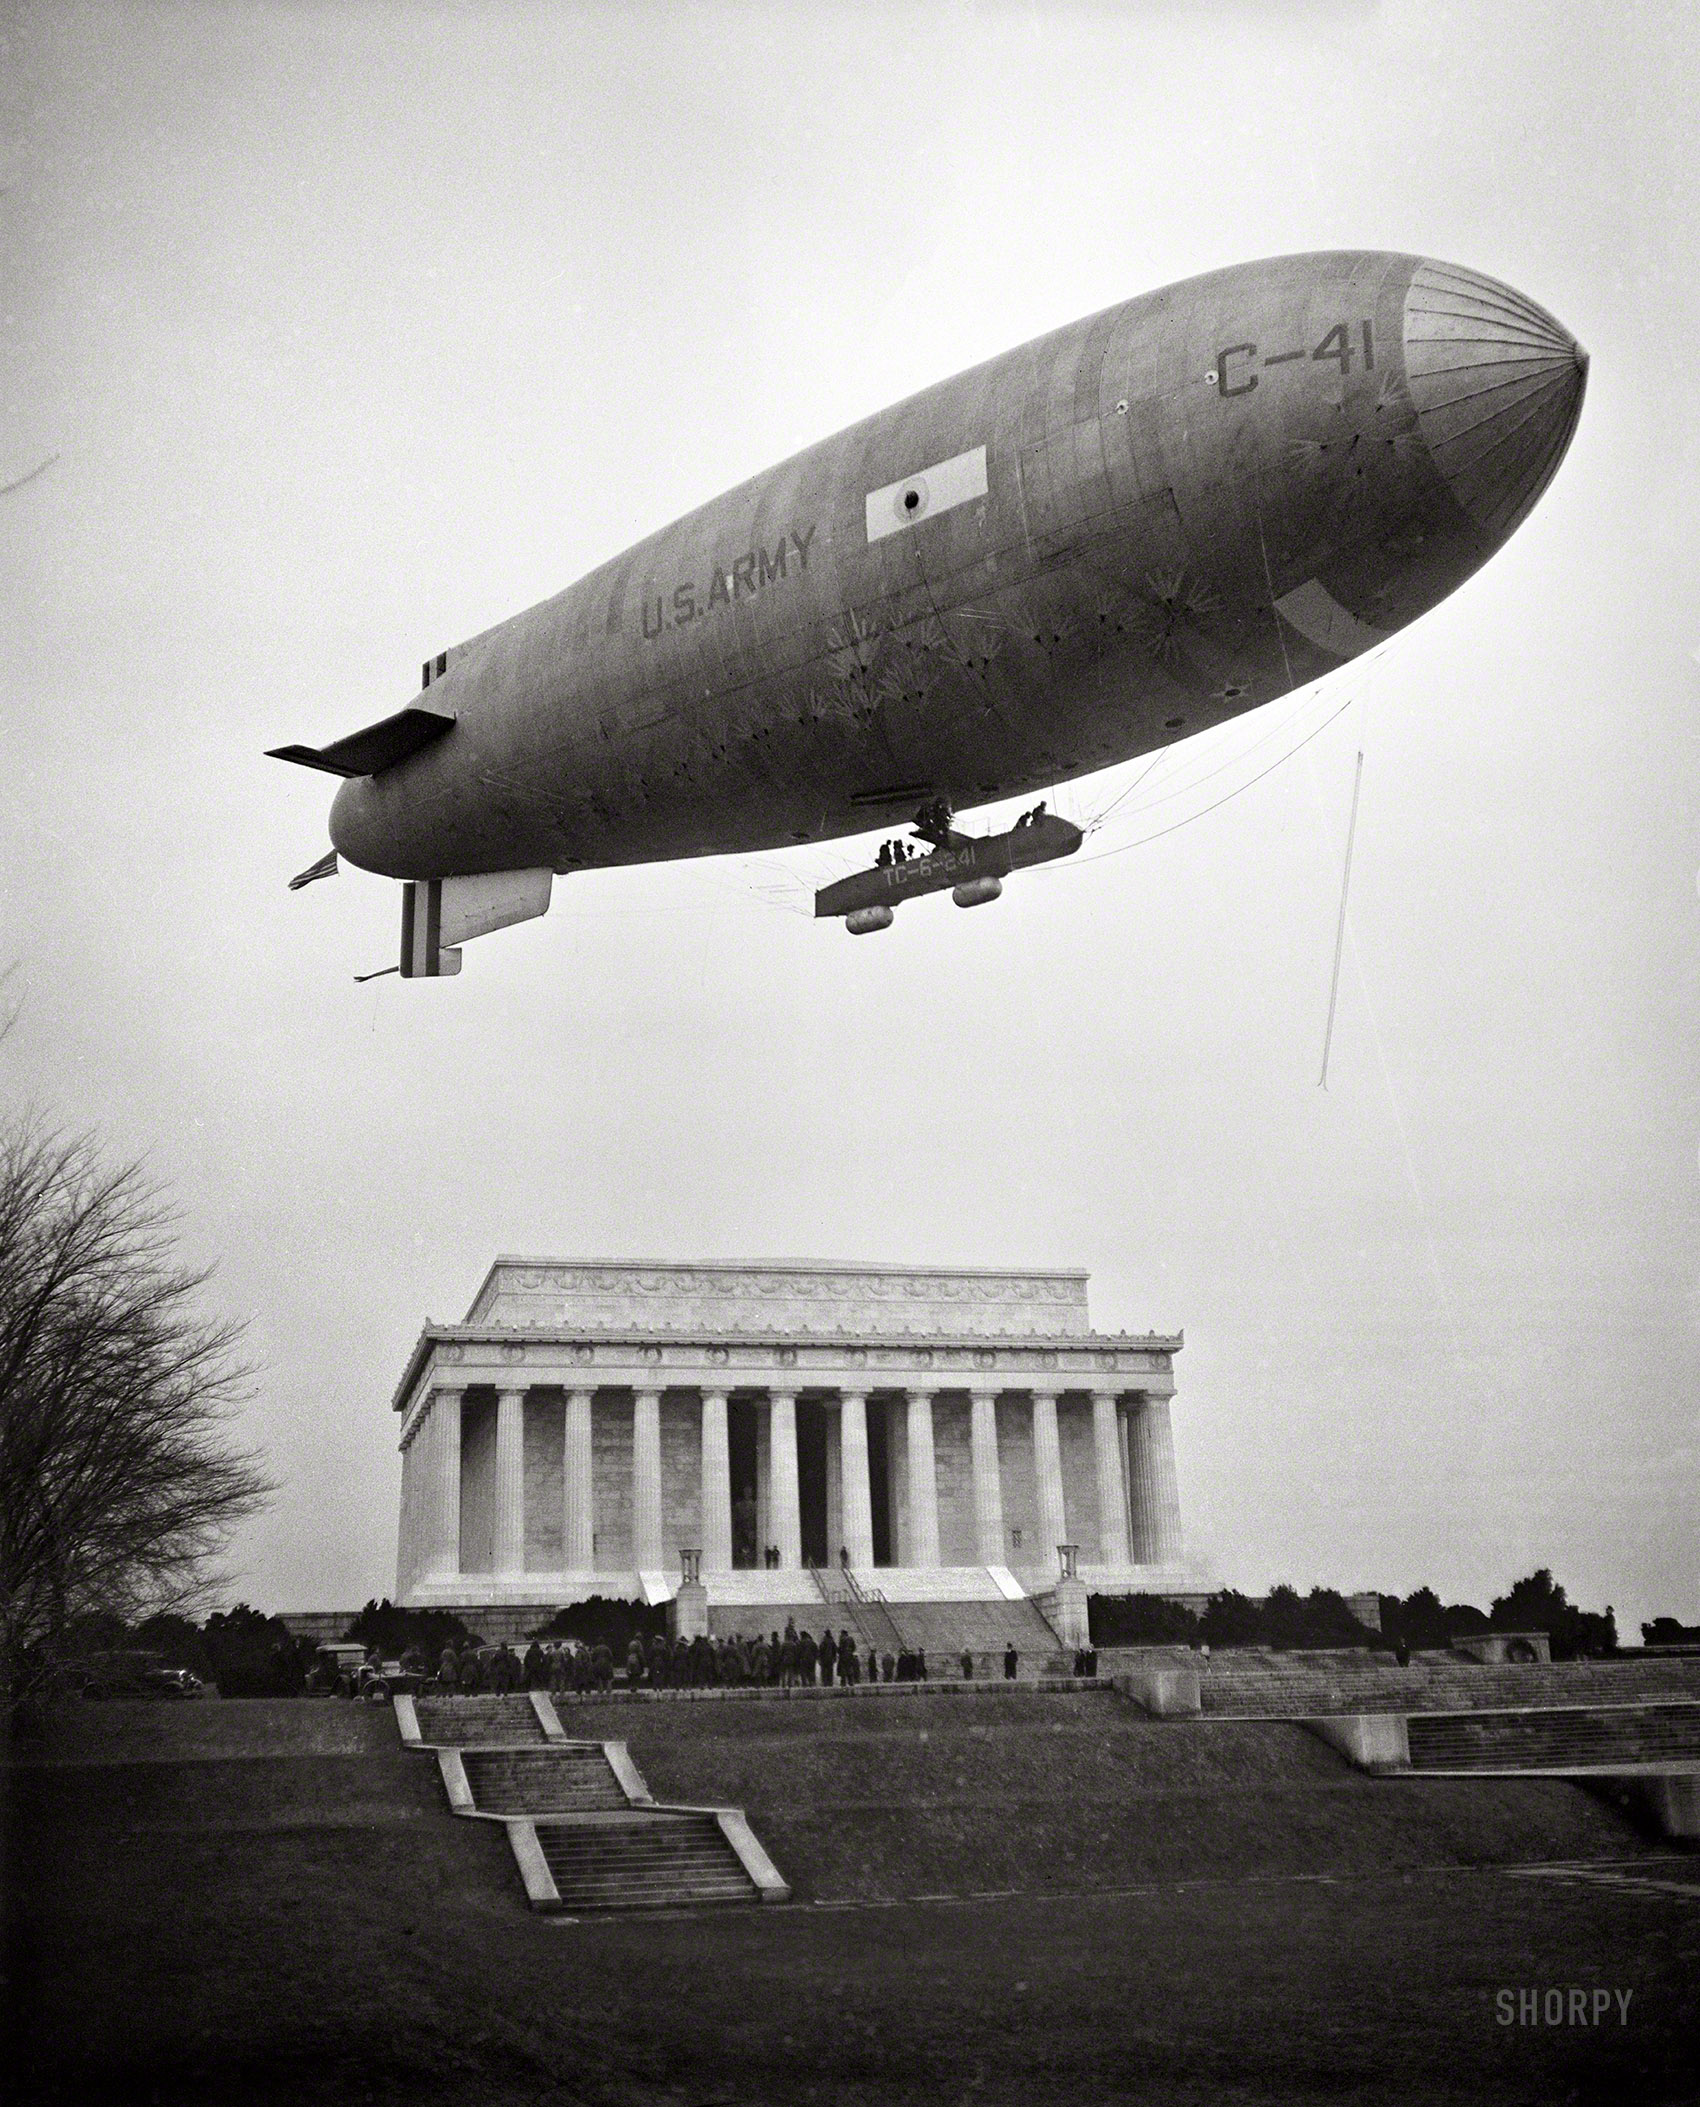 February 1930. Washington, D.C. "Army Airship C-41 lands on Mall and airmen, led by Brigadier General William J. Flood of the 19th Airship Company, place wreath at Lincoln Memorial, honoring Lincoln's Birthday." Harris & Ewing Collection glass negative. View full size.